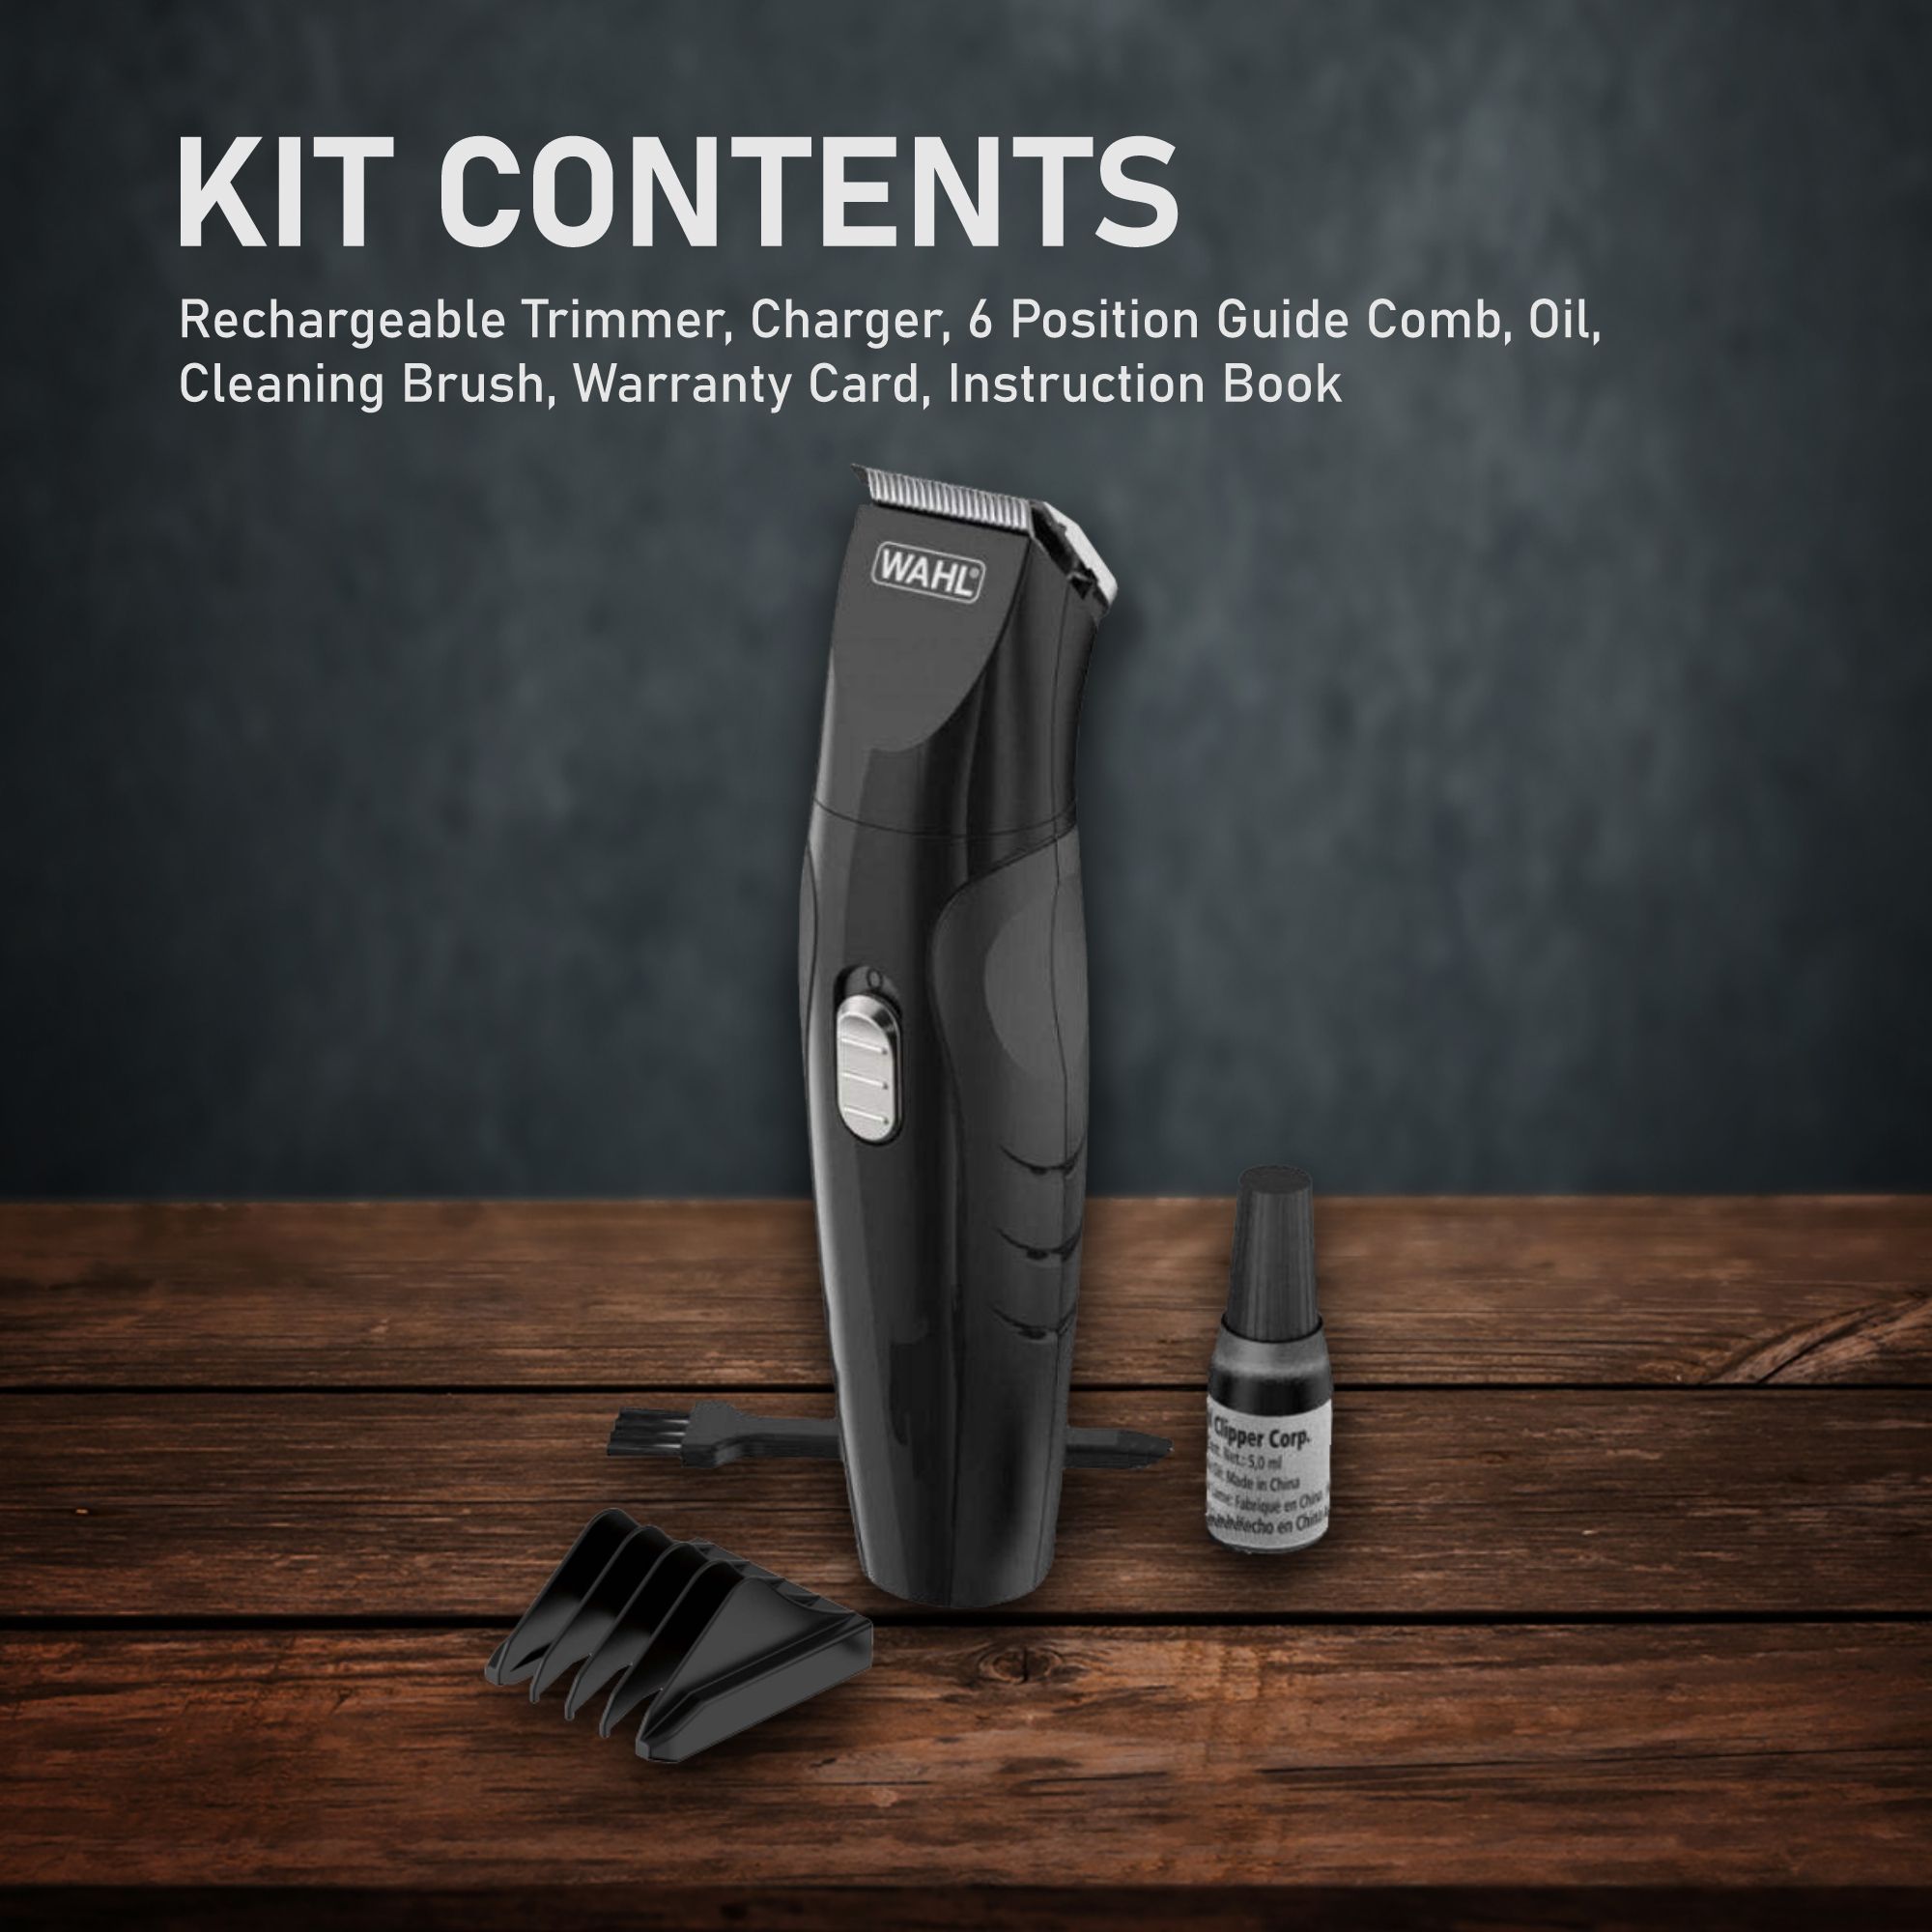 Wahl Groomsman Rechargeable Cordless Trimmer Black 9685-024 – Beautiful